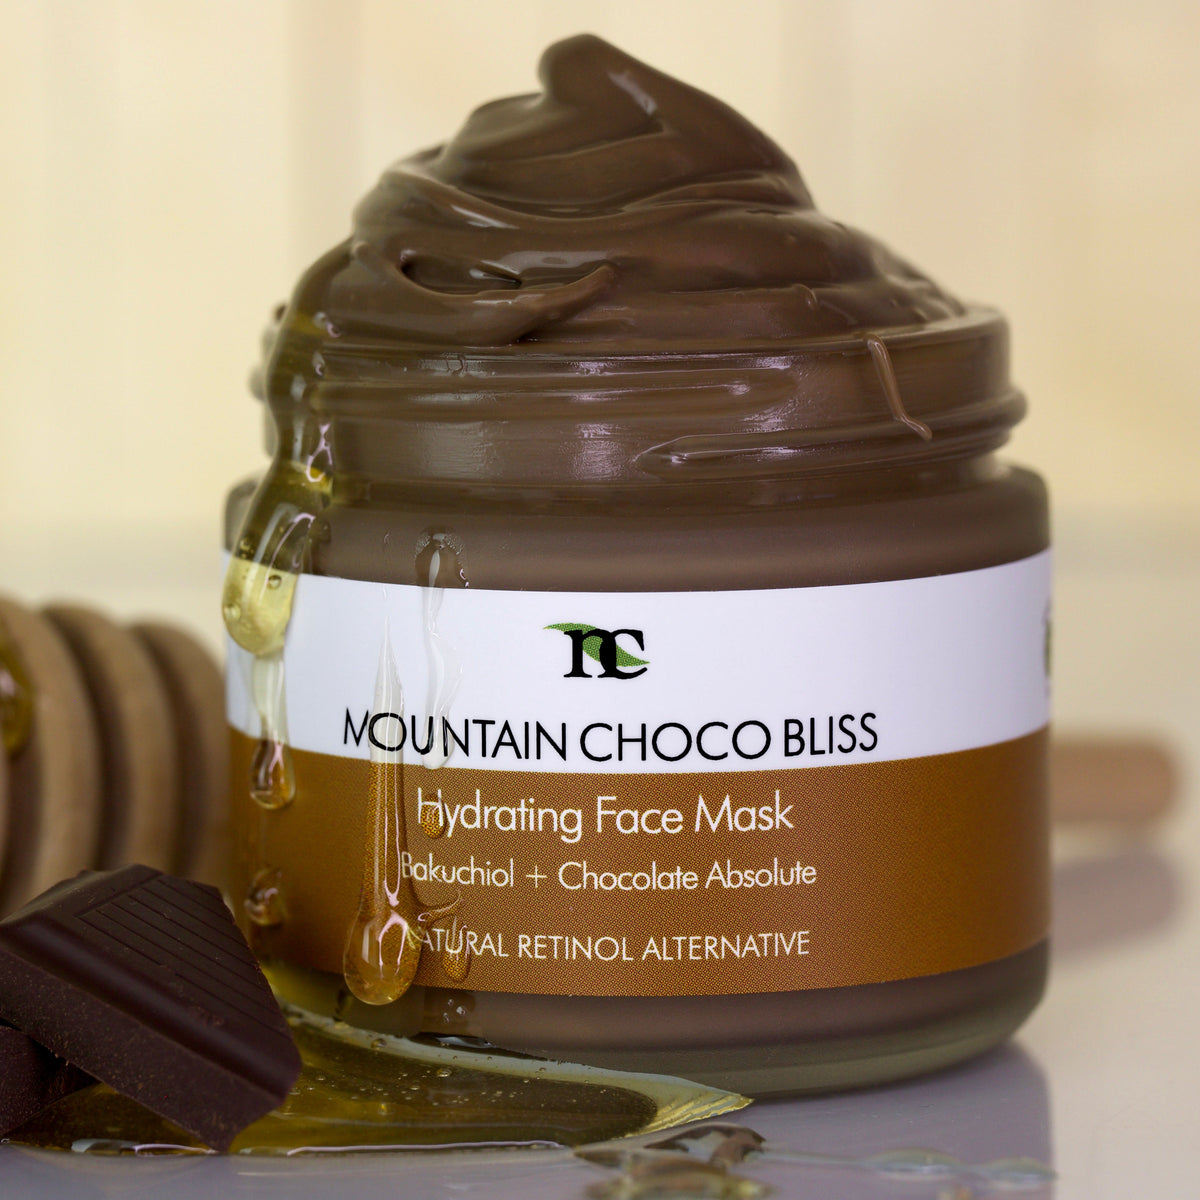 Mountain Choco Bliss Face Mask